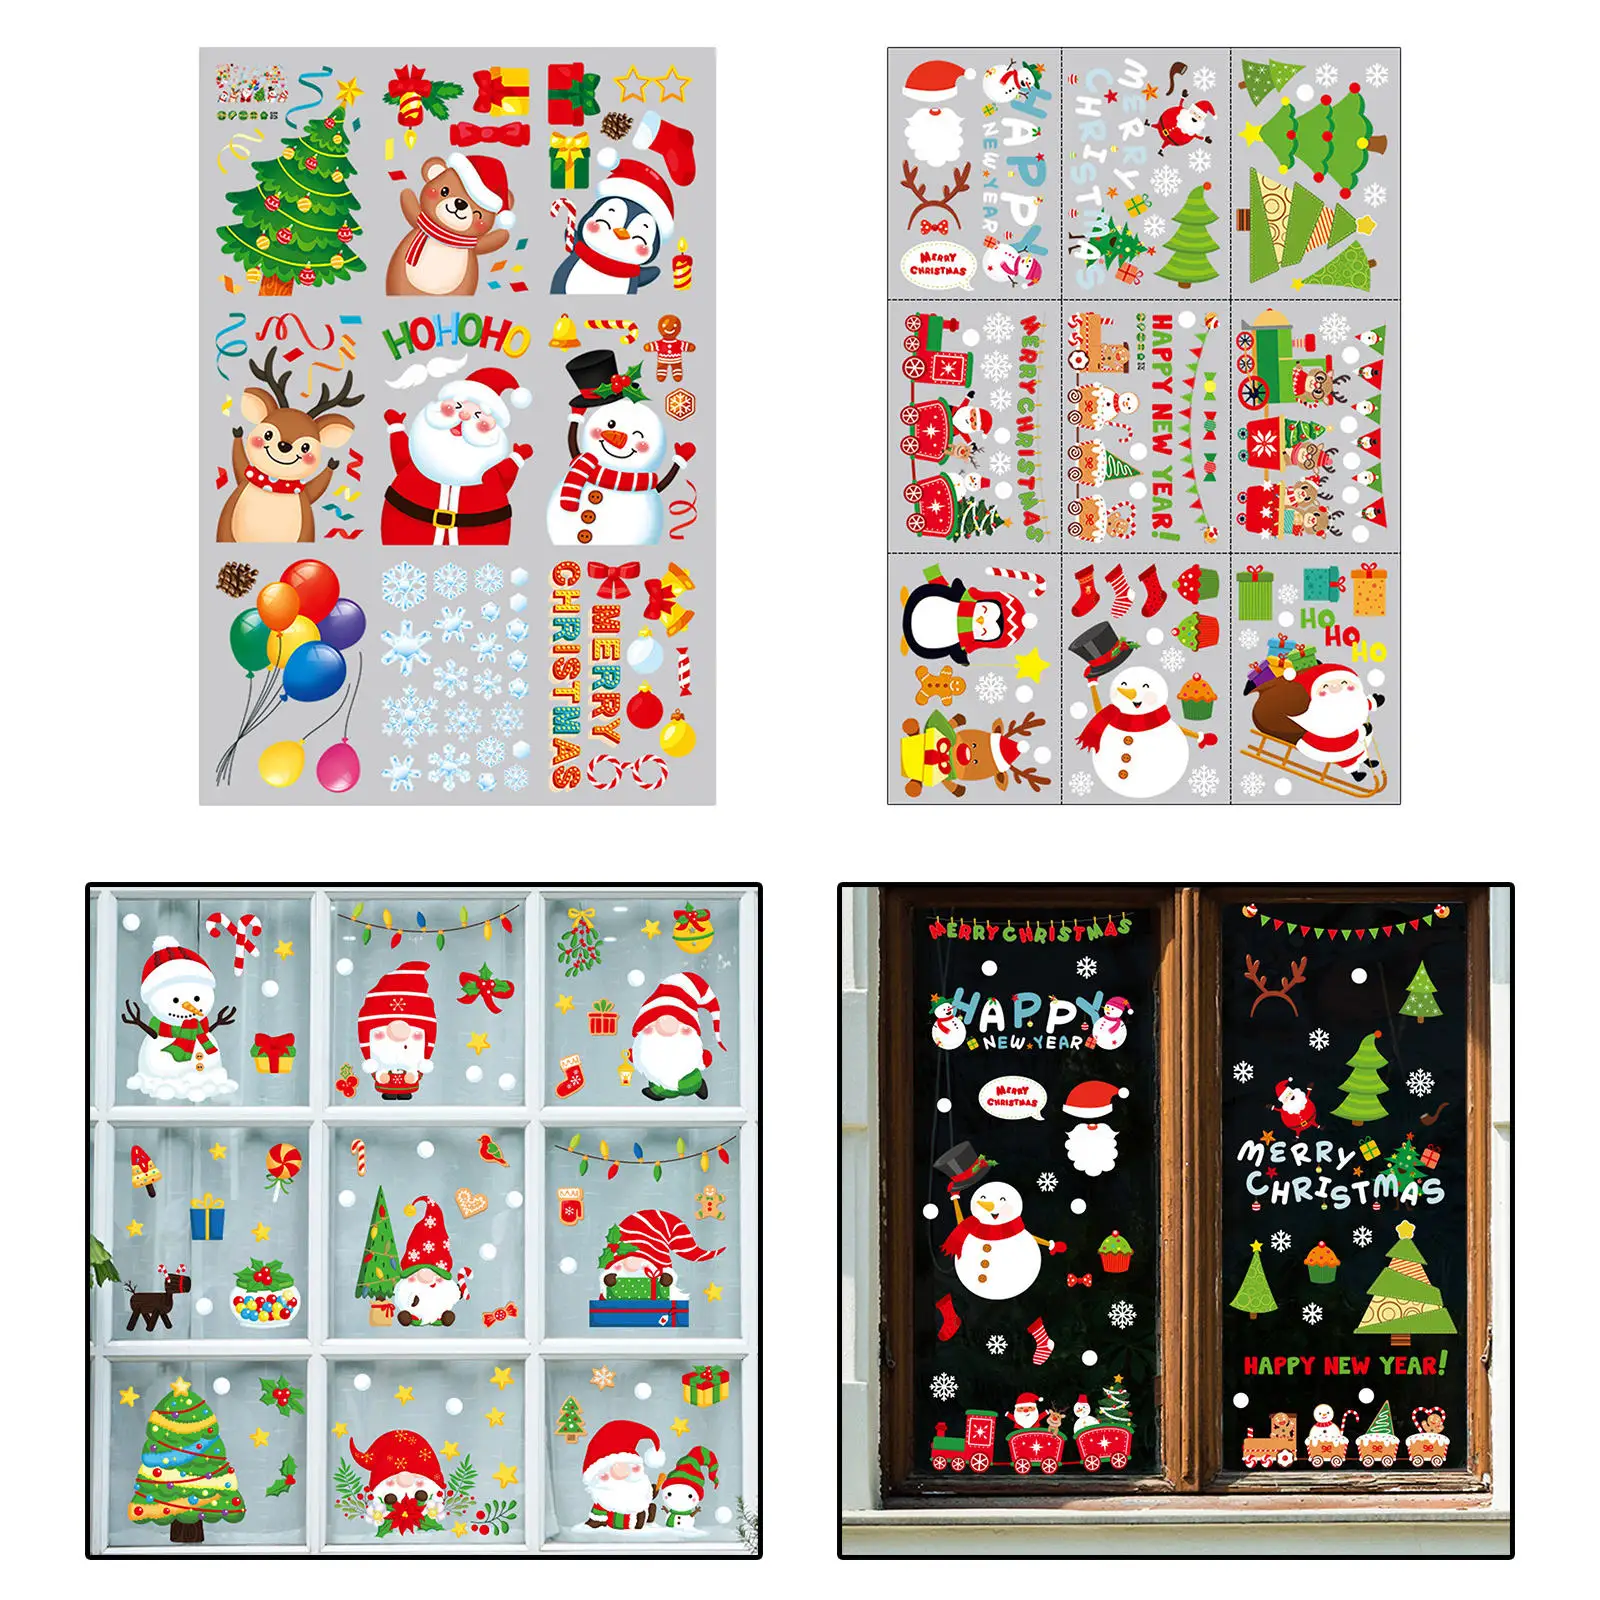 DIY Merry Christmas Wall Stickers Window Glass Stickers Christmas Decorations For Home Christmas Ornaments